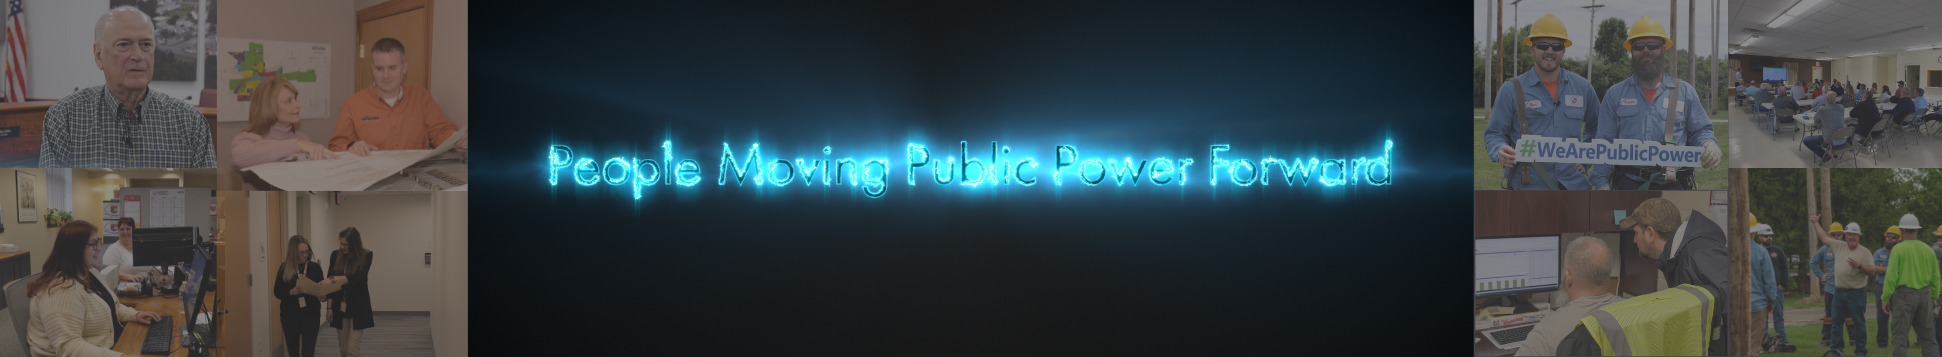 People Moving Public Power Forward graphic (1942 x 357 px)